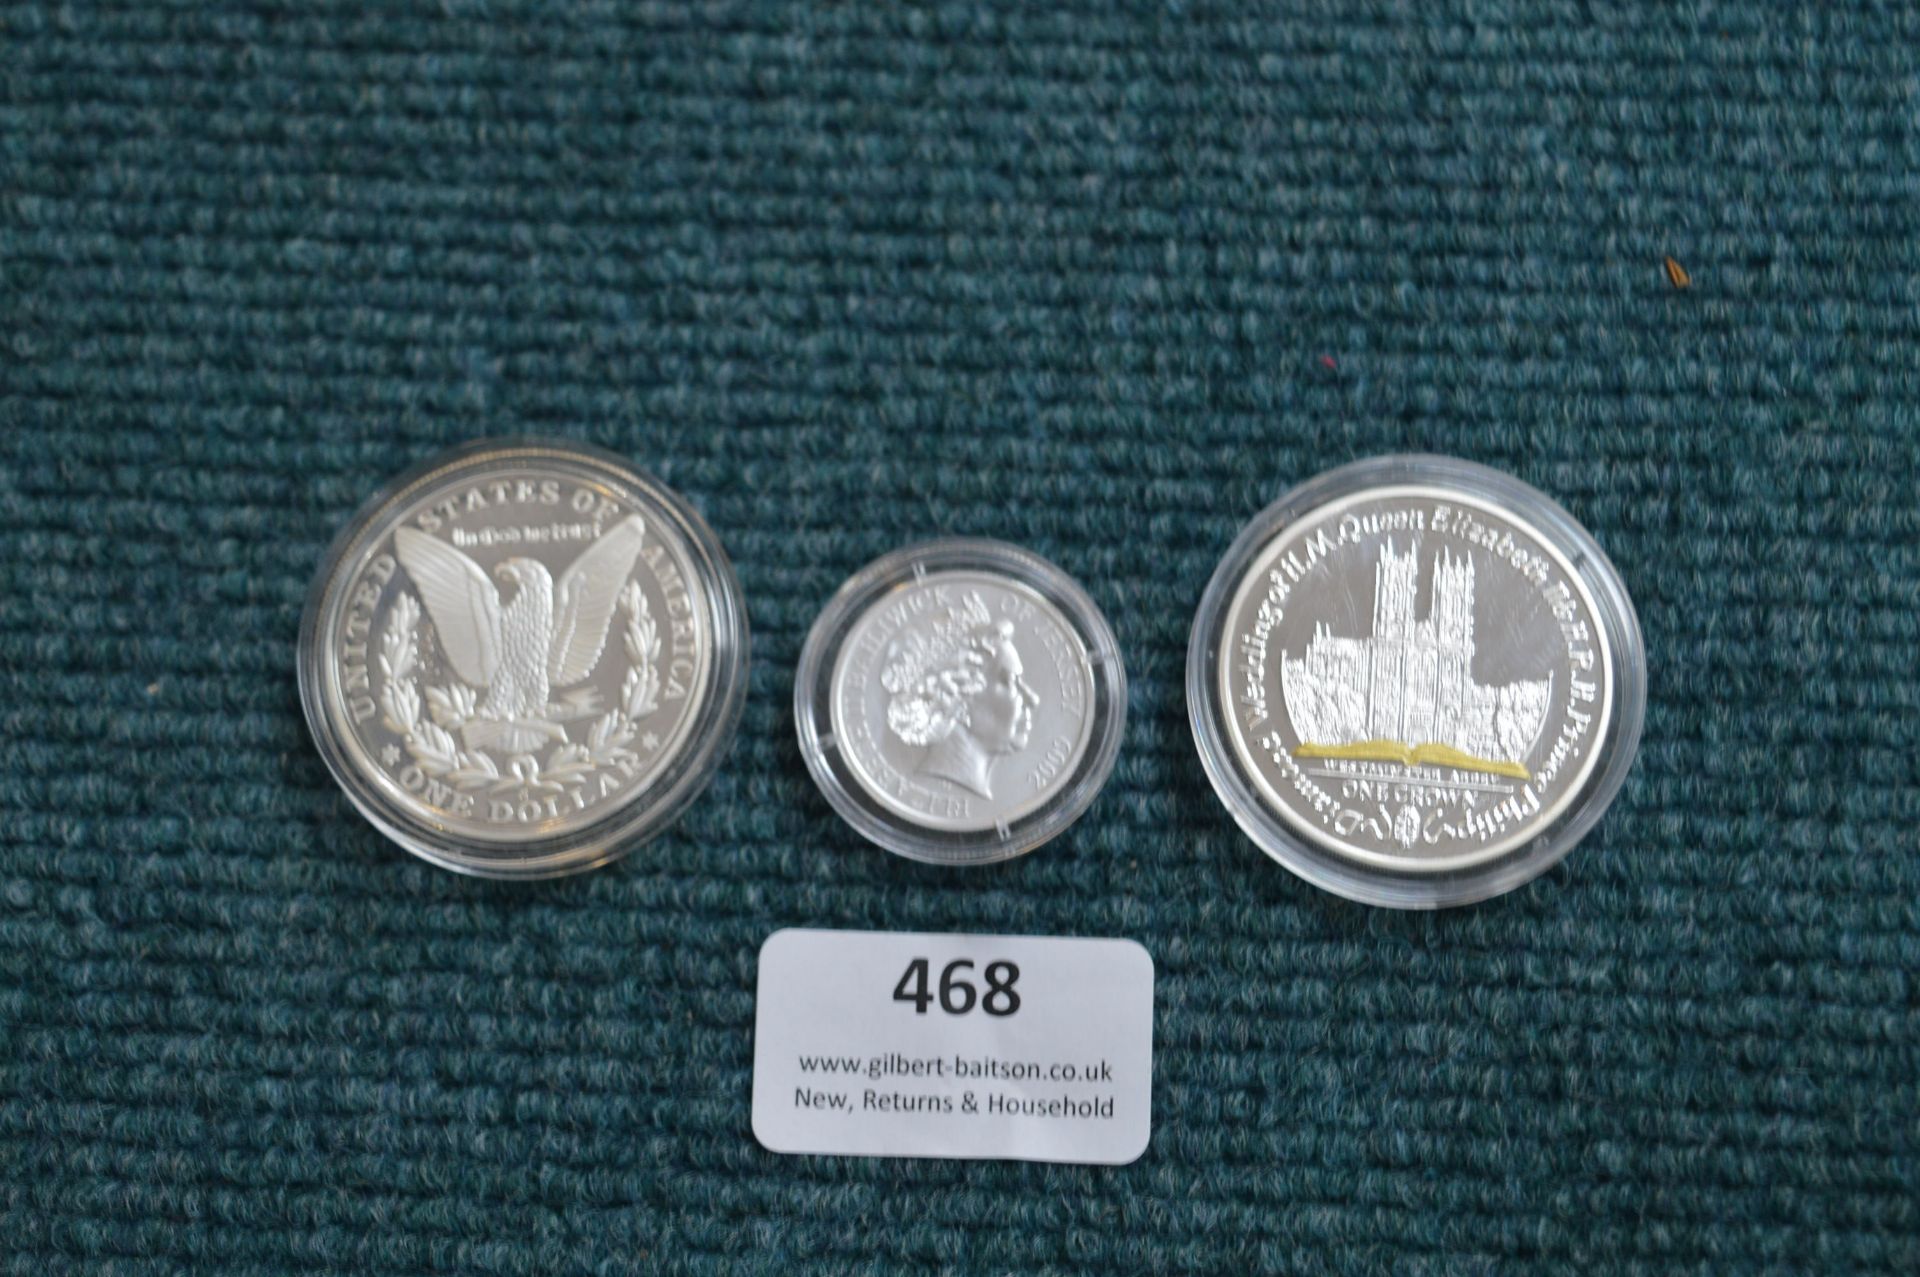 US Silver Dollar, UK Silver Crown, and Jersey 2009